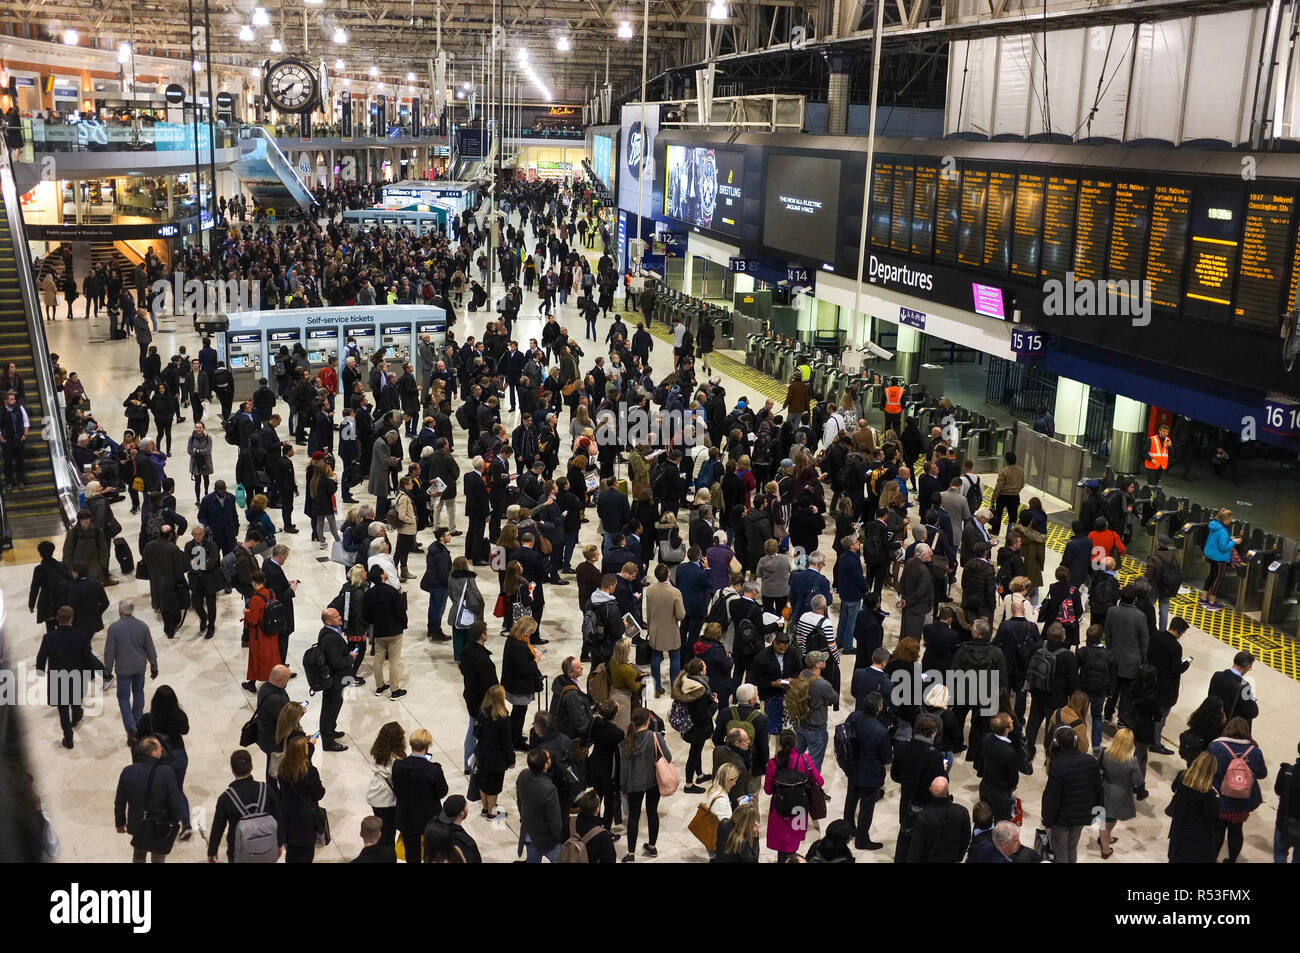 Rush hour commuters wait for the next train arrival information at Waterloo railway station in London. November 2018 Stock Photo